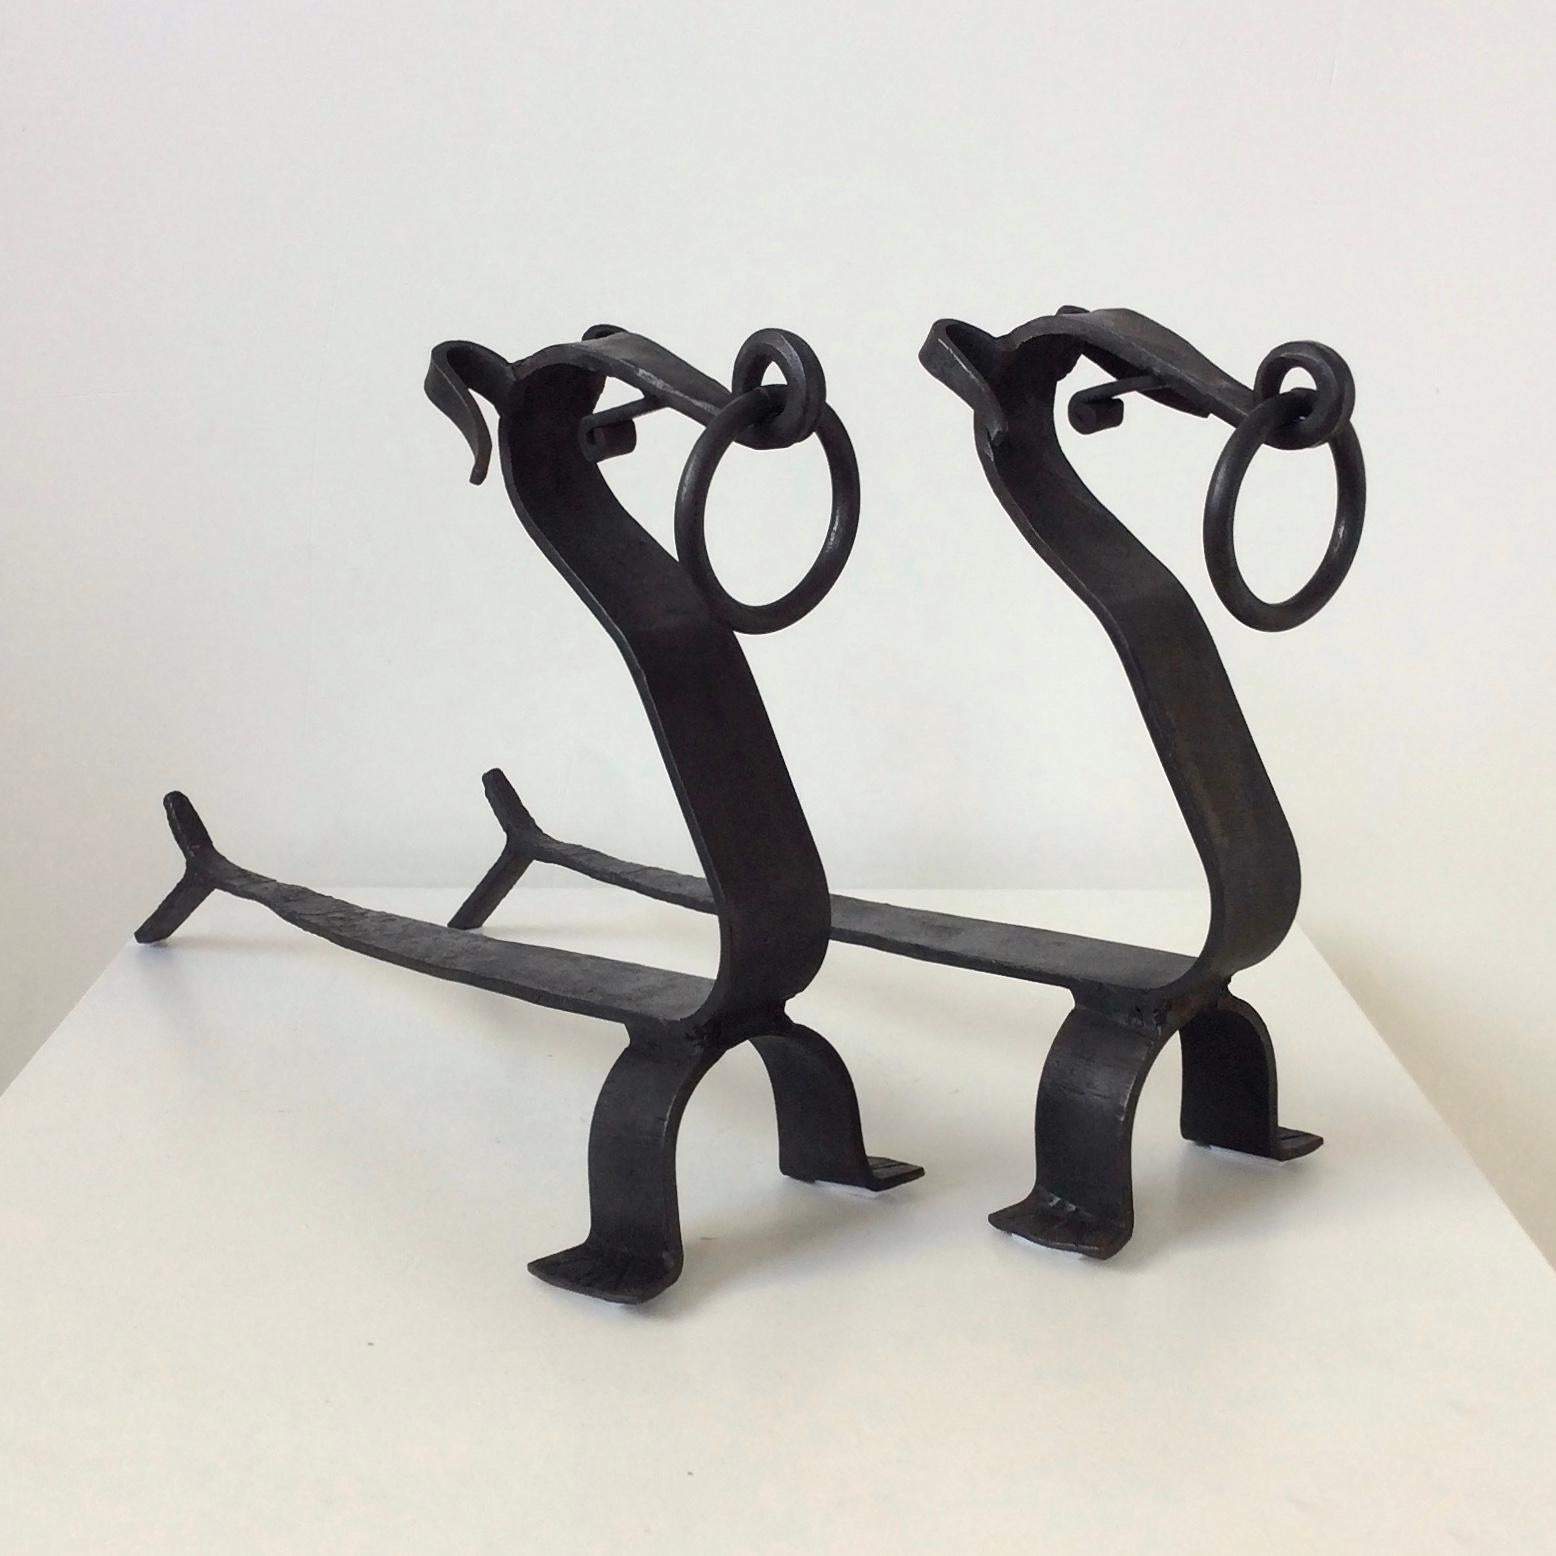 Pair of dog andirons, circa 1960, France.
Black wrought iron.
Dimensions: 40 cm D, 13 cm W, 27 cm H.
All purchases are covered by our Buyer Protection Guarantee.
This item can be returned within 7 days of delivery.
Please ask for our best shipping